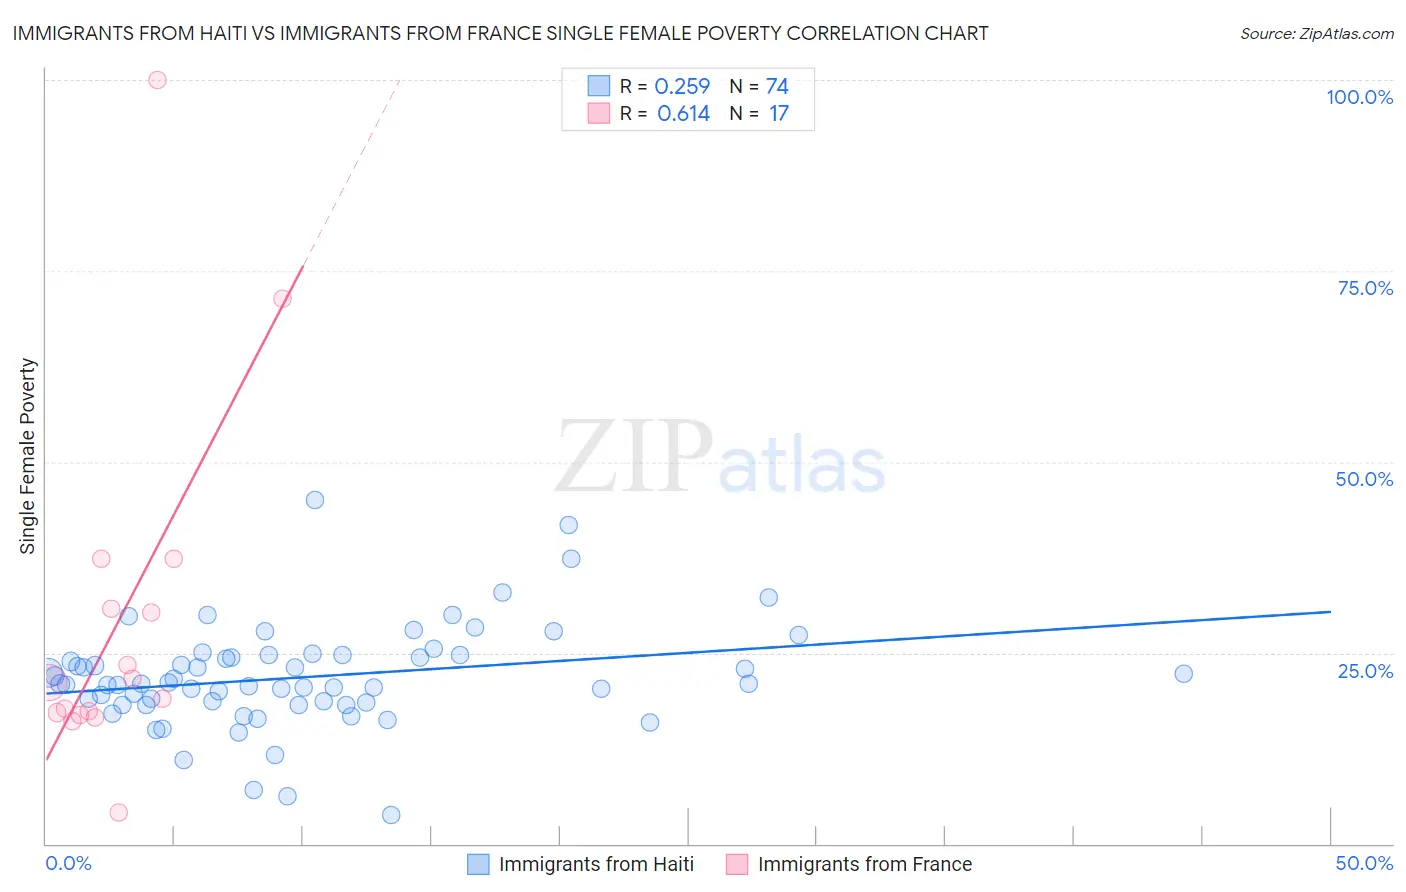 Immigrants from Haiti vs Immigrants from France Single Female Poverty